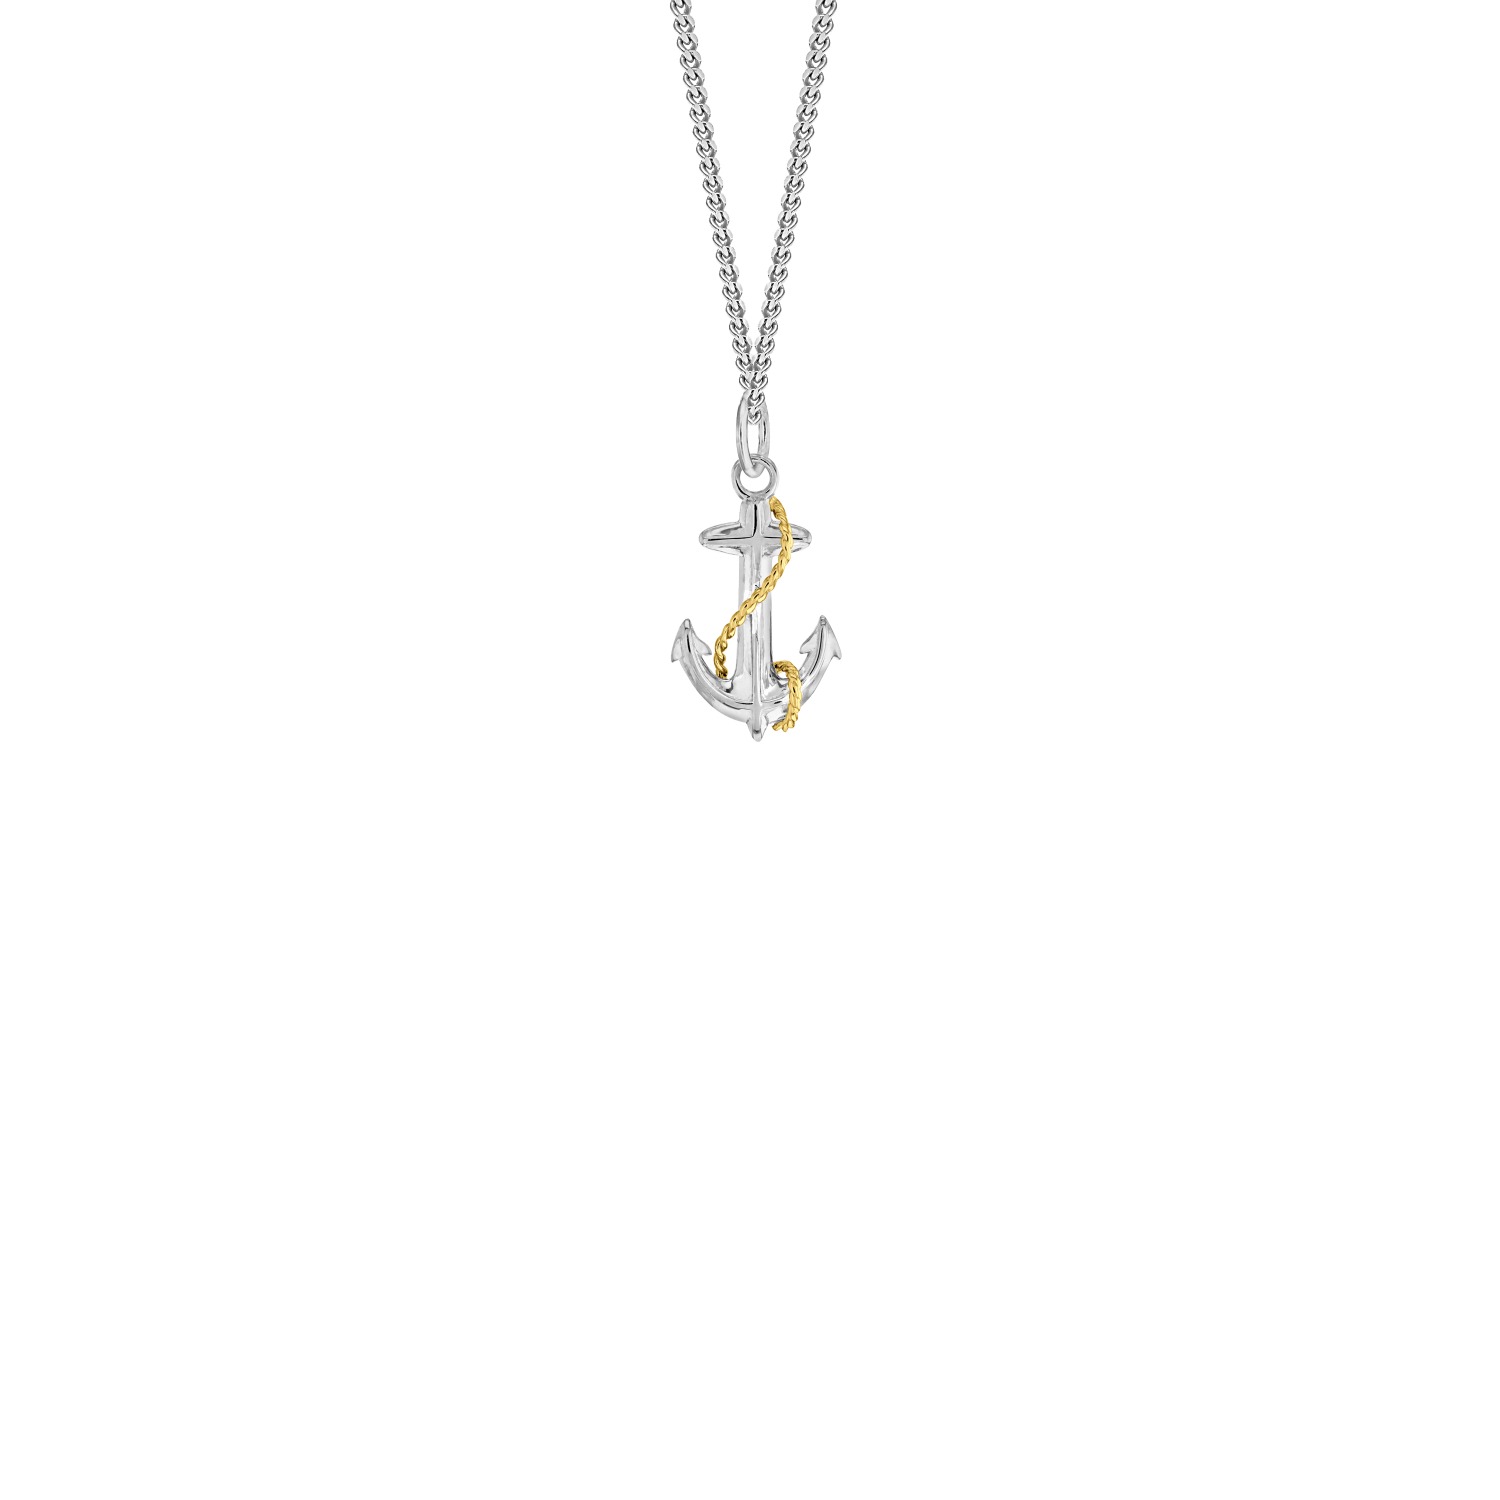 Men's Mini Anchor Pendant Sterling Silver With 18Kt Gold-Plate Detail True Rocks